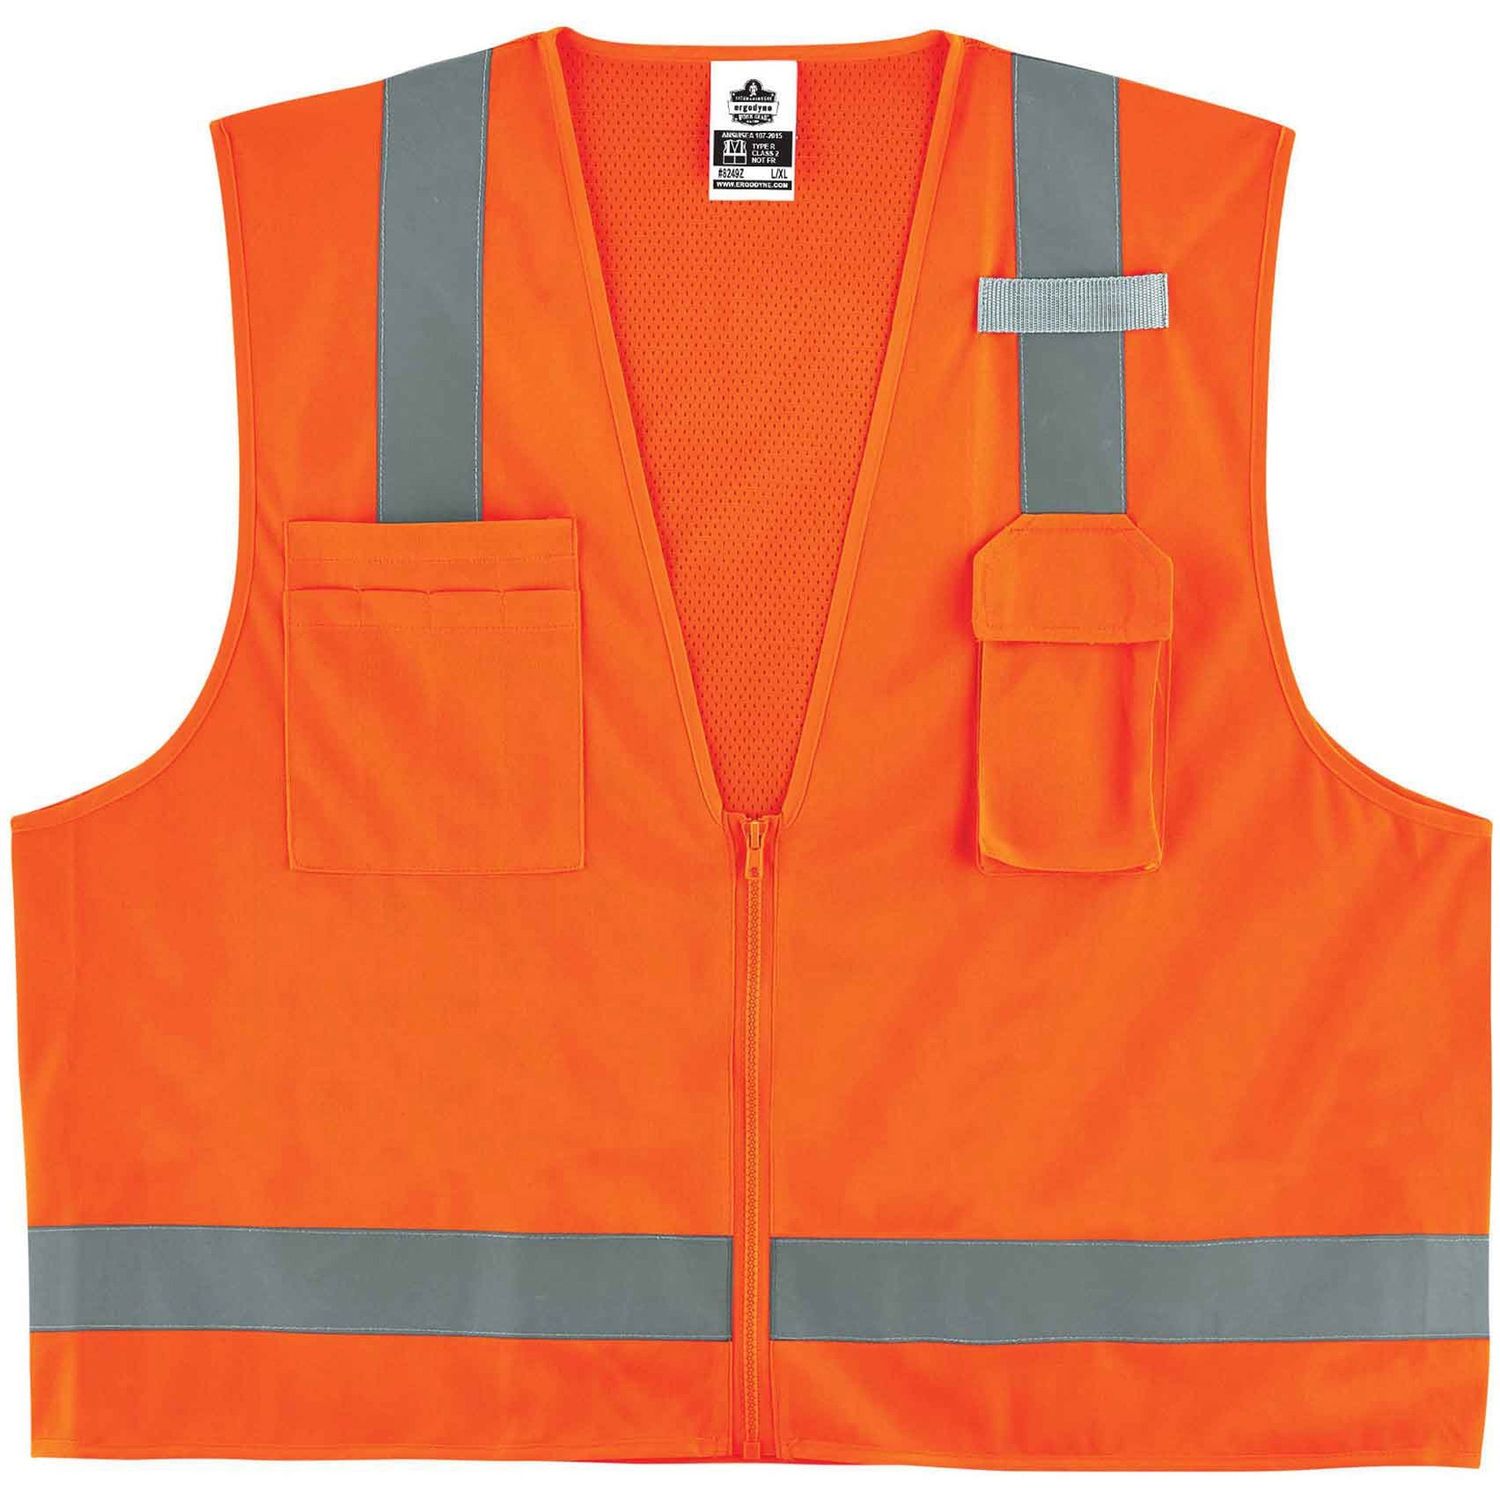 8249Z Type R Class 2 Economy Surveyors Vest Recommended for: Construction, Baggage Handling, Pocket, Mic Tab, Reflective, High Visibility, Breathable, Lightweight, Chest Pocket, Small/Medium Size